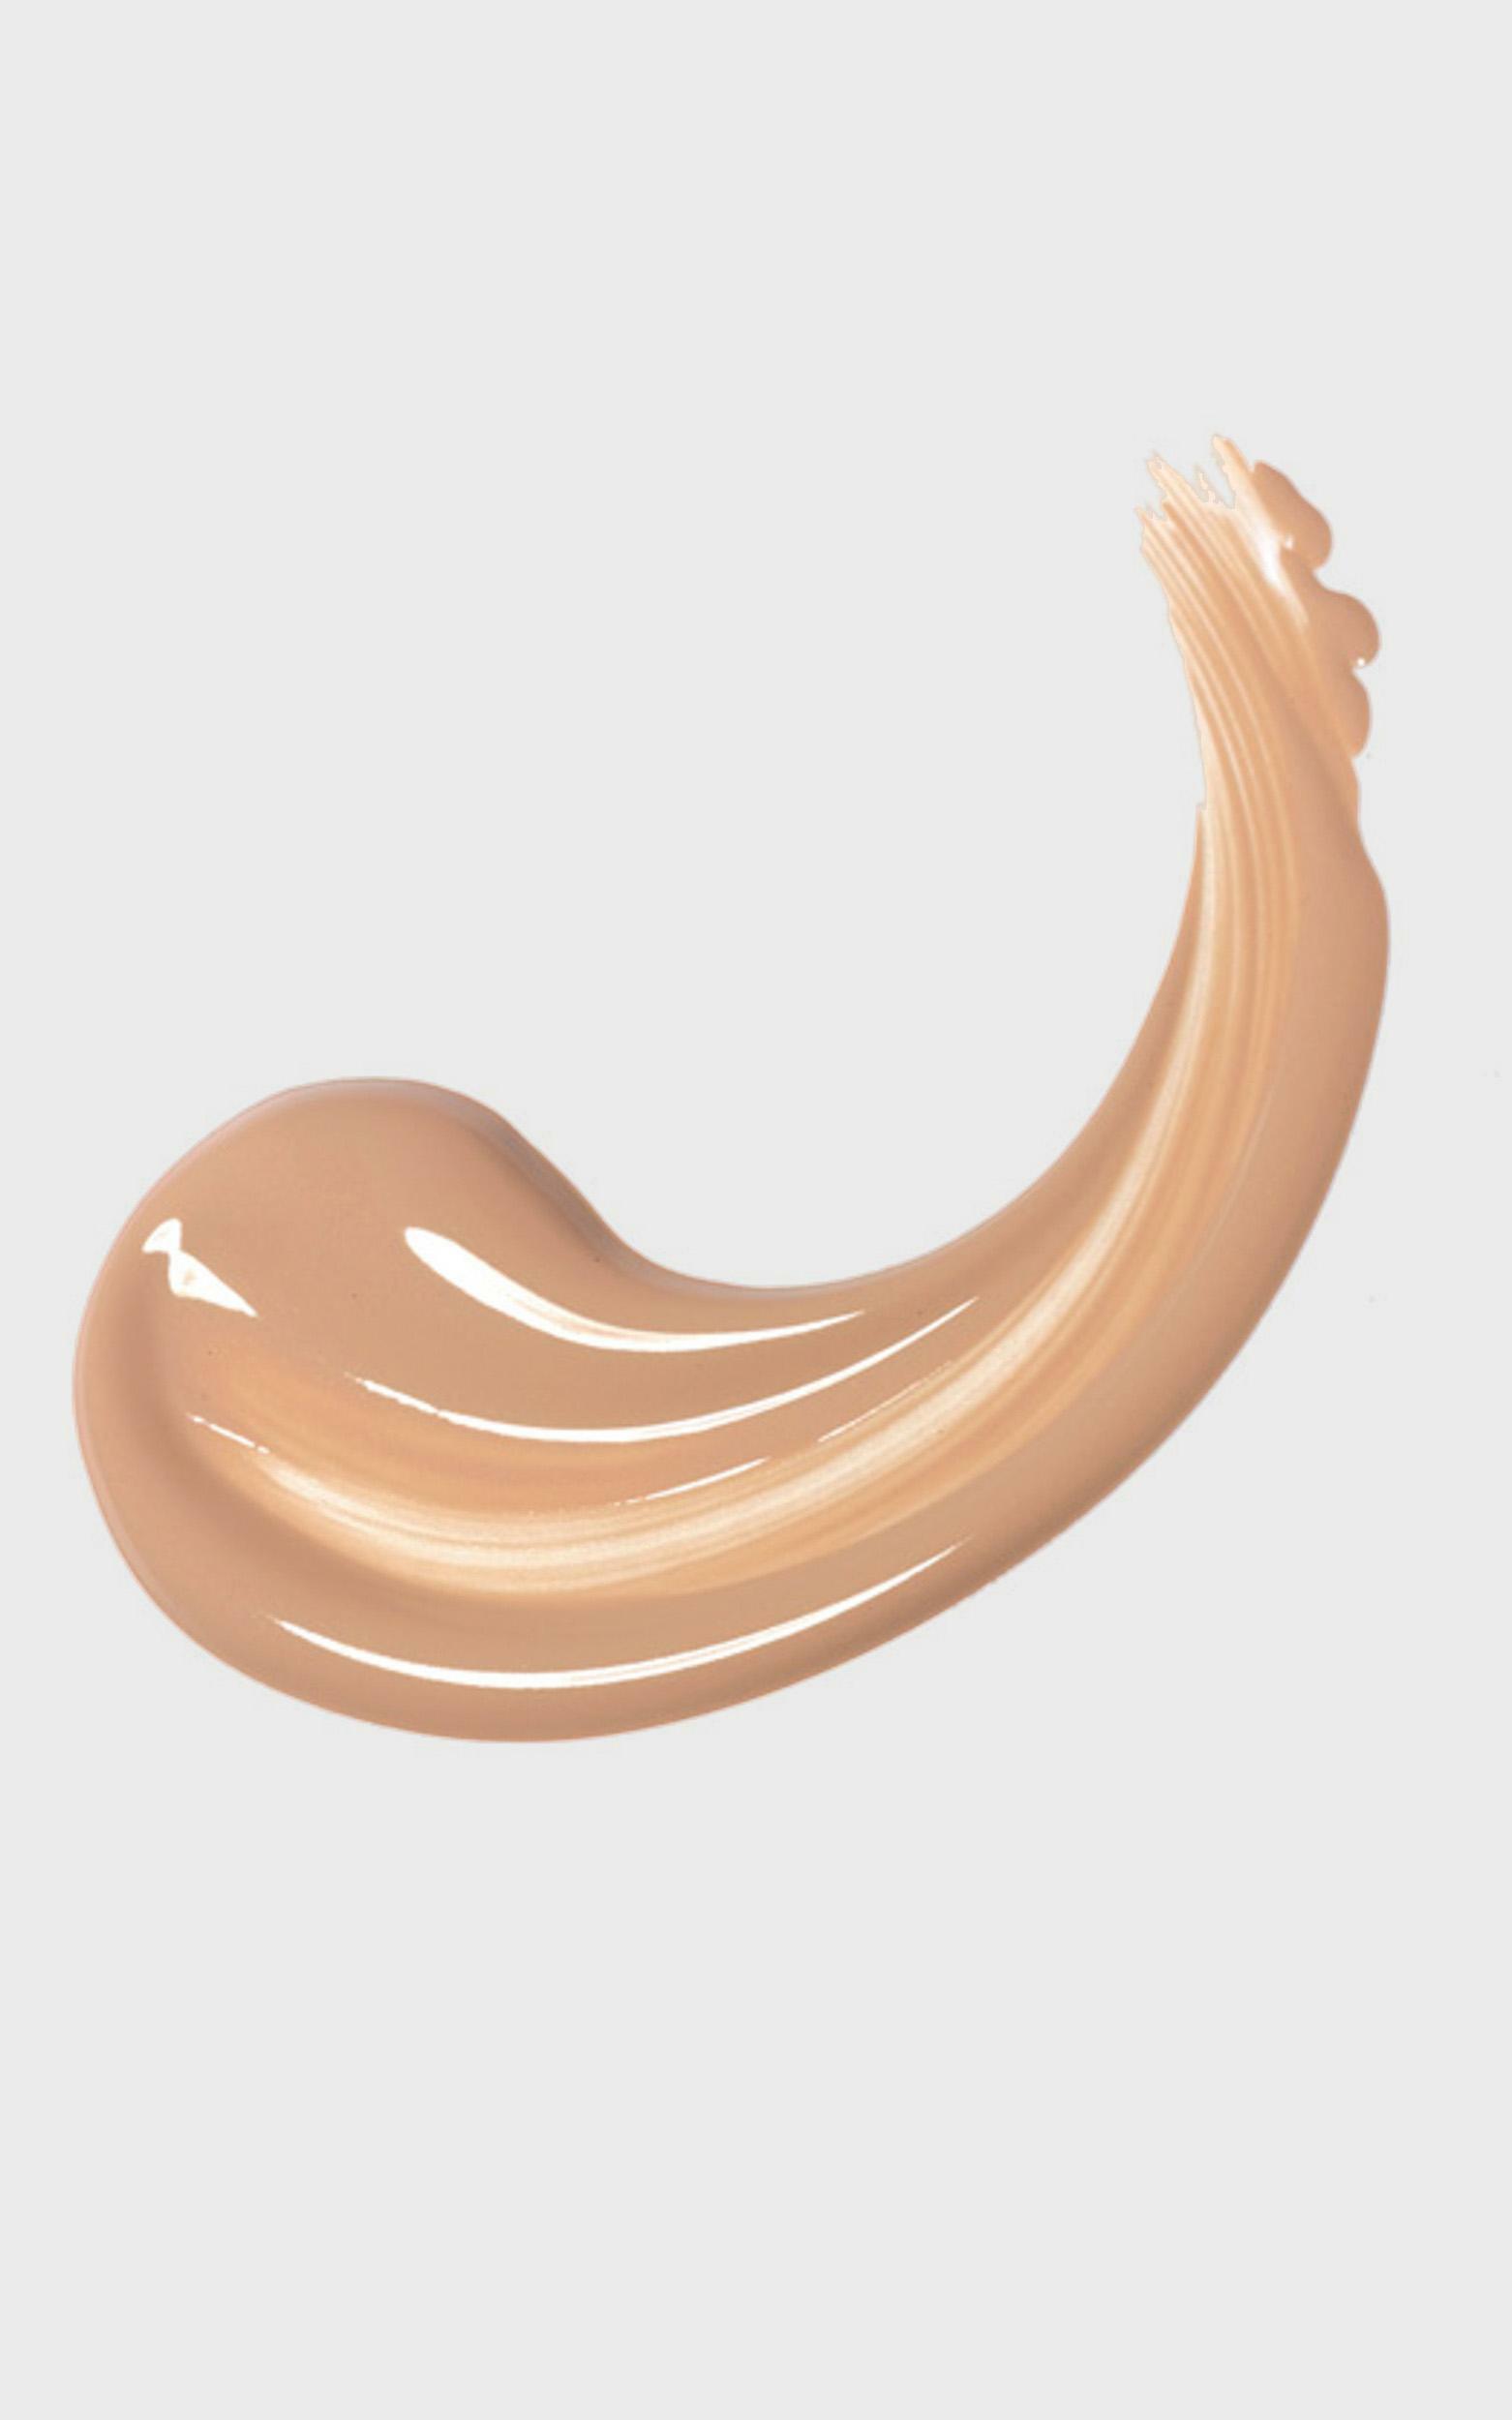 MCoBeauty - Ultra Stay Flawless Foundation in Creamy Beige, BRN1, hi-res image number null